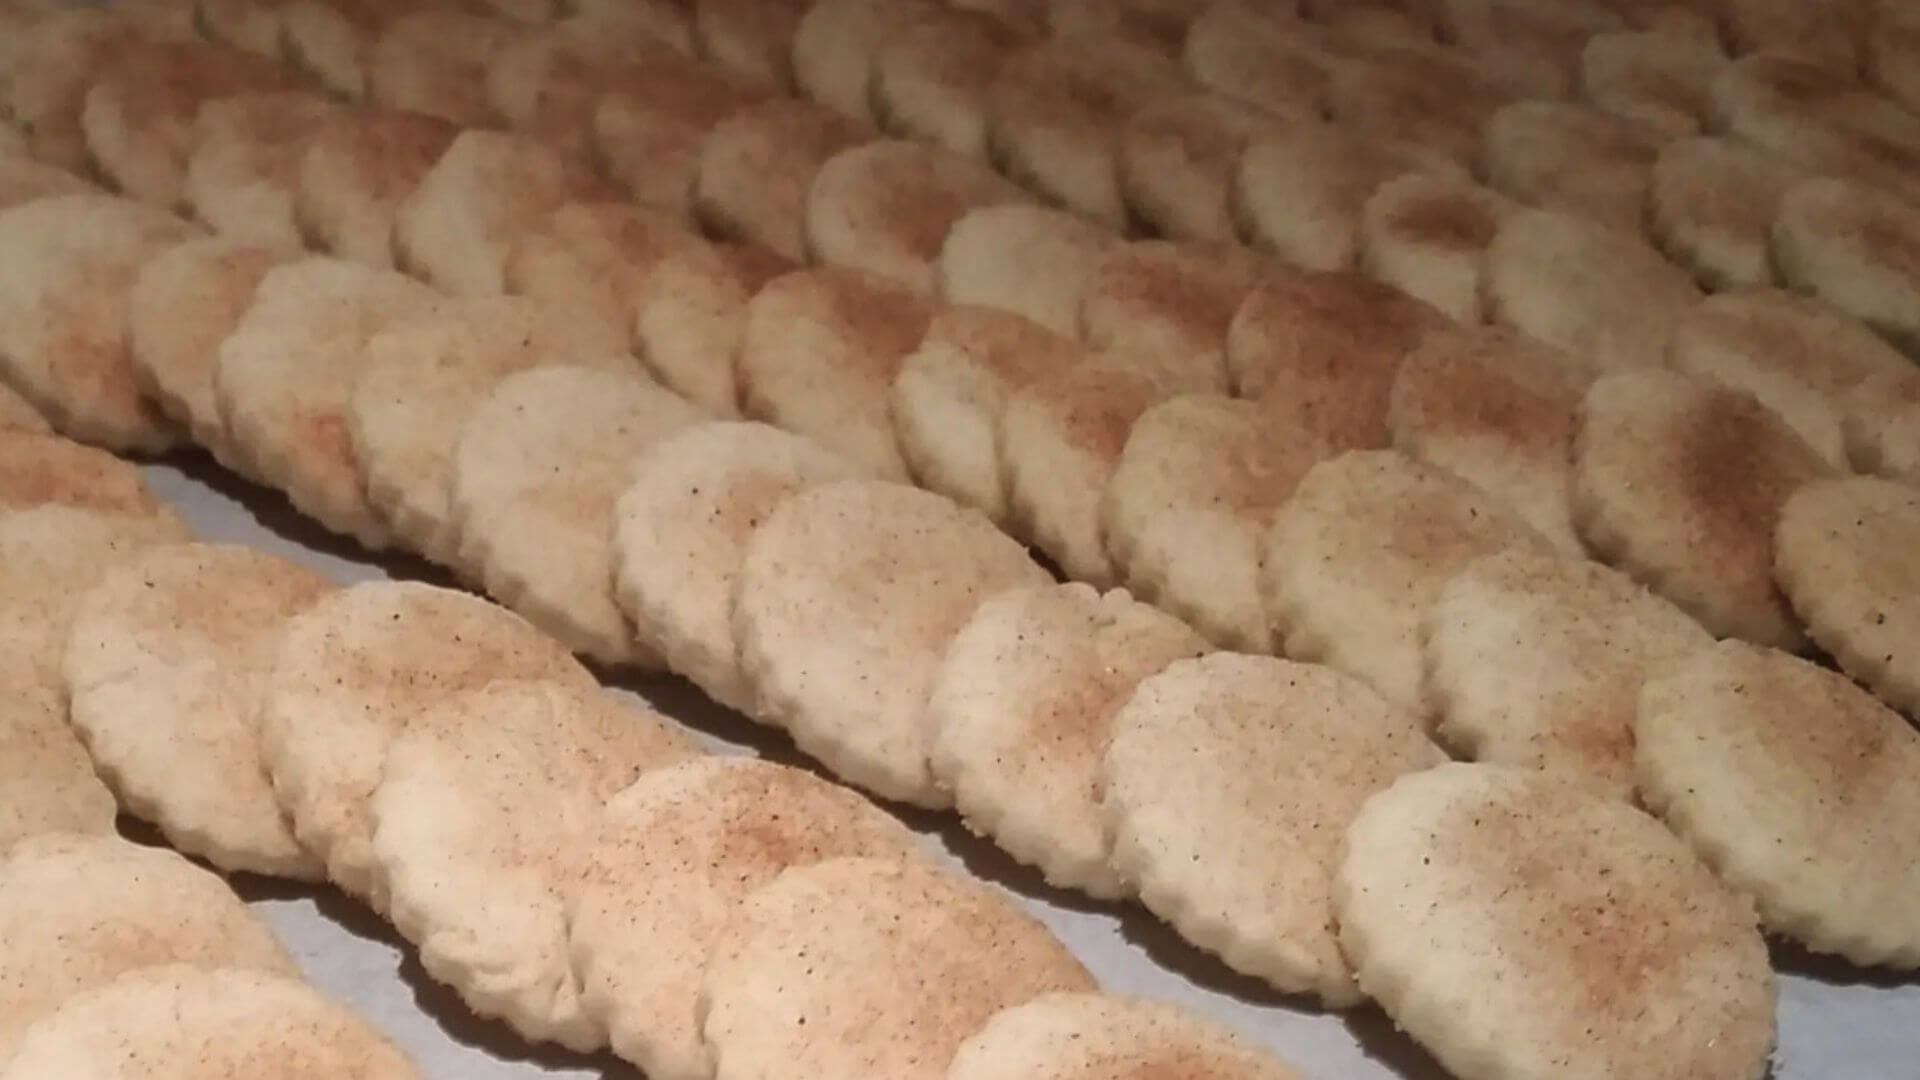 Rows of Bizcochito cookies - round sugar cookies with cinnamon on a tray